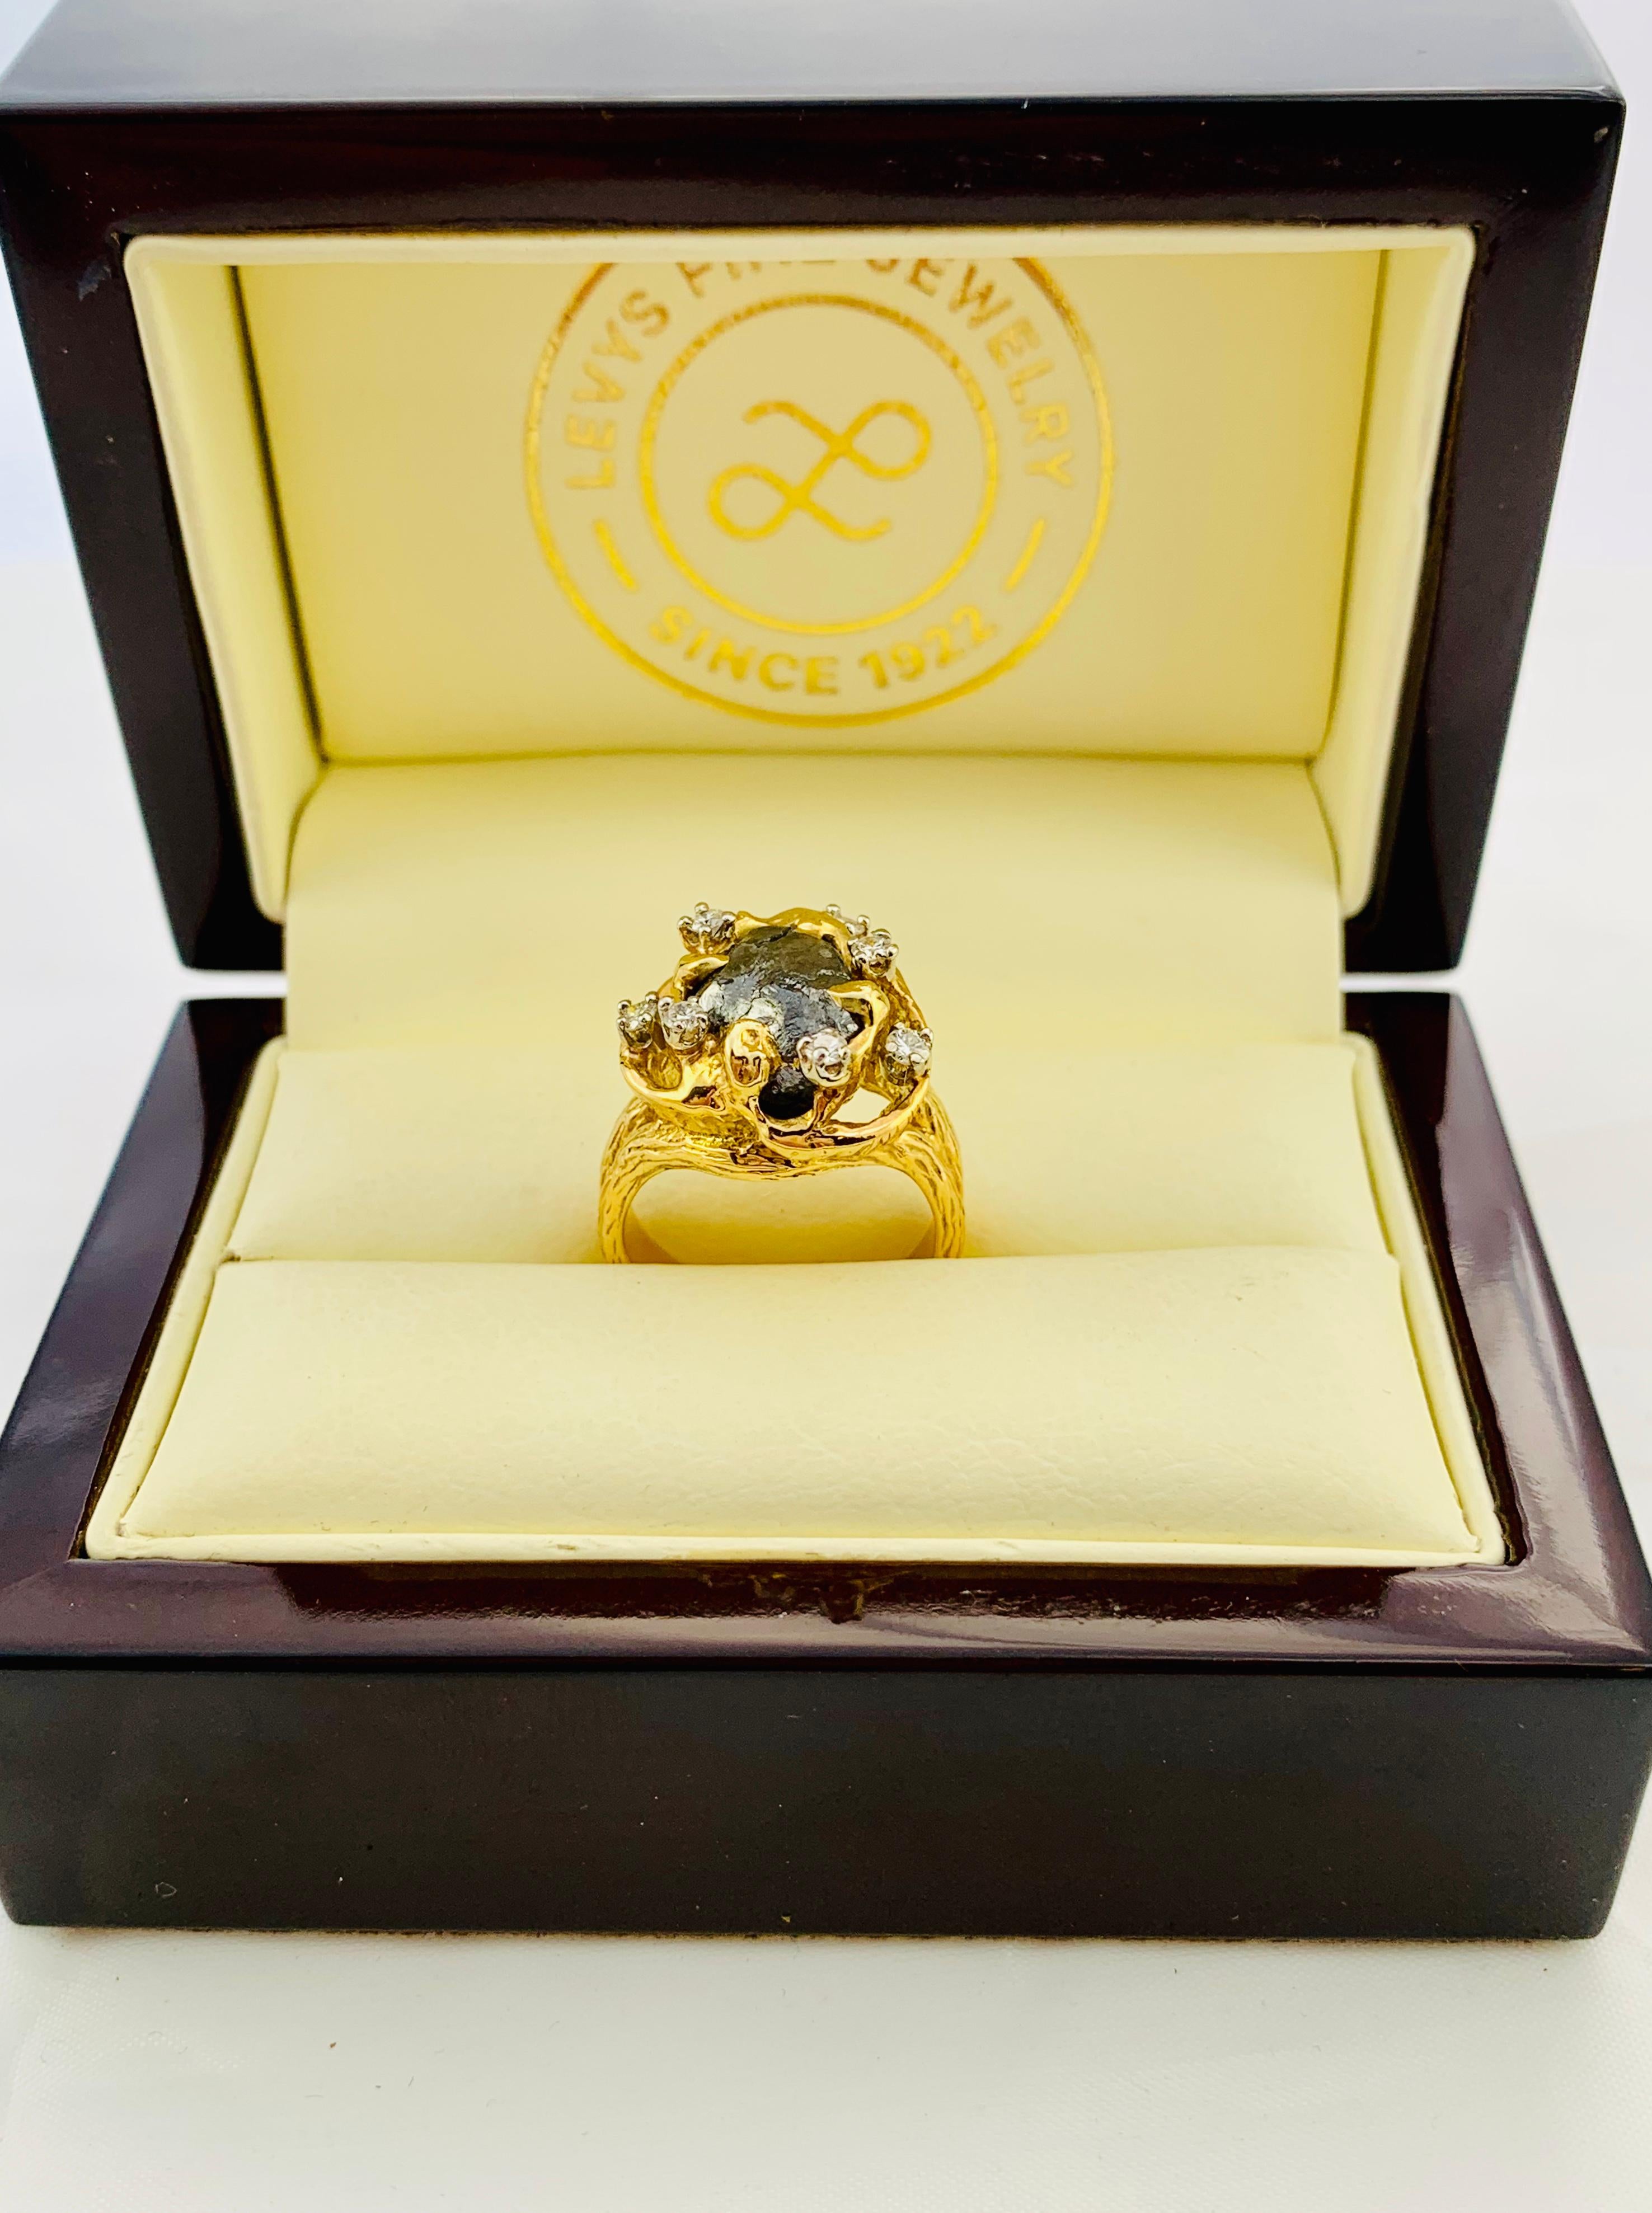 Peter Linderman 18 Karat Yellow Gold, Diamond and Rough Diamond Ladies Ring In Excellent Condition For Sale In Birmingham, AL